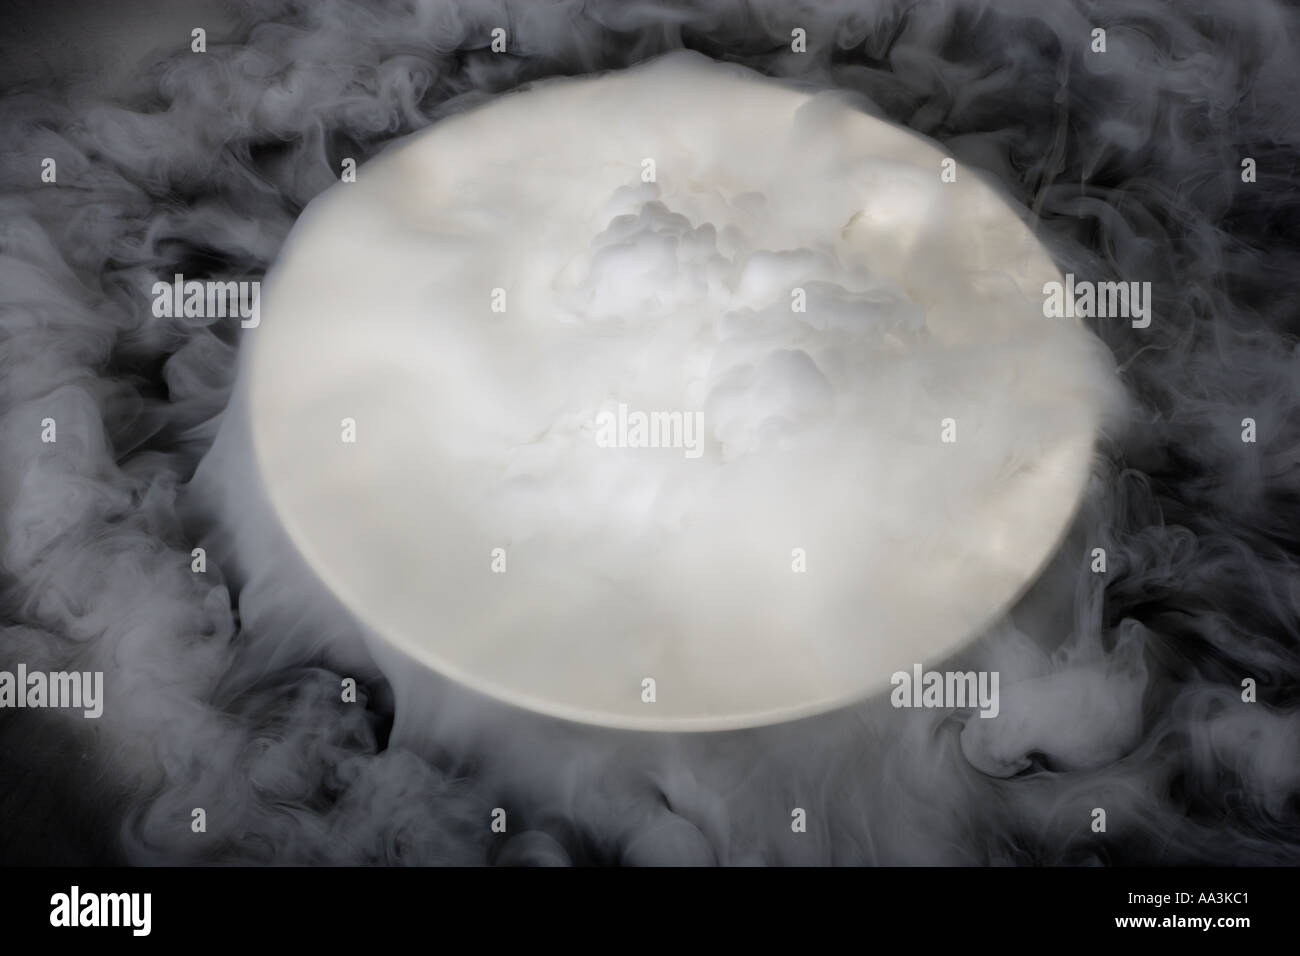 Dry ice CO2 gas spilling out of a bowl Stock Photo